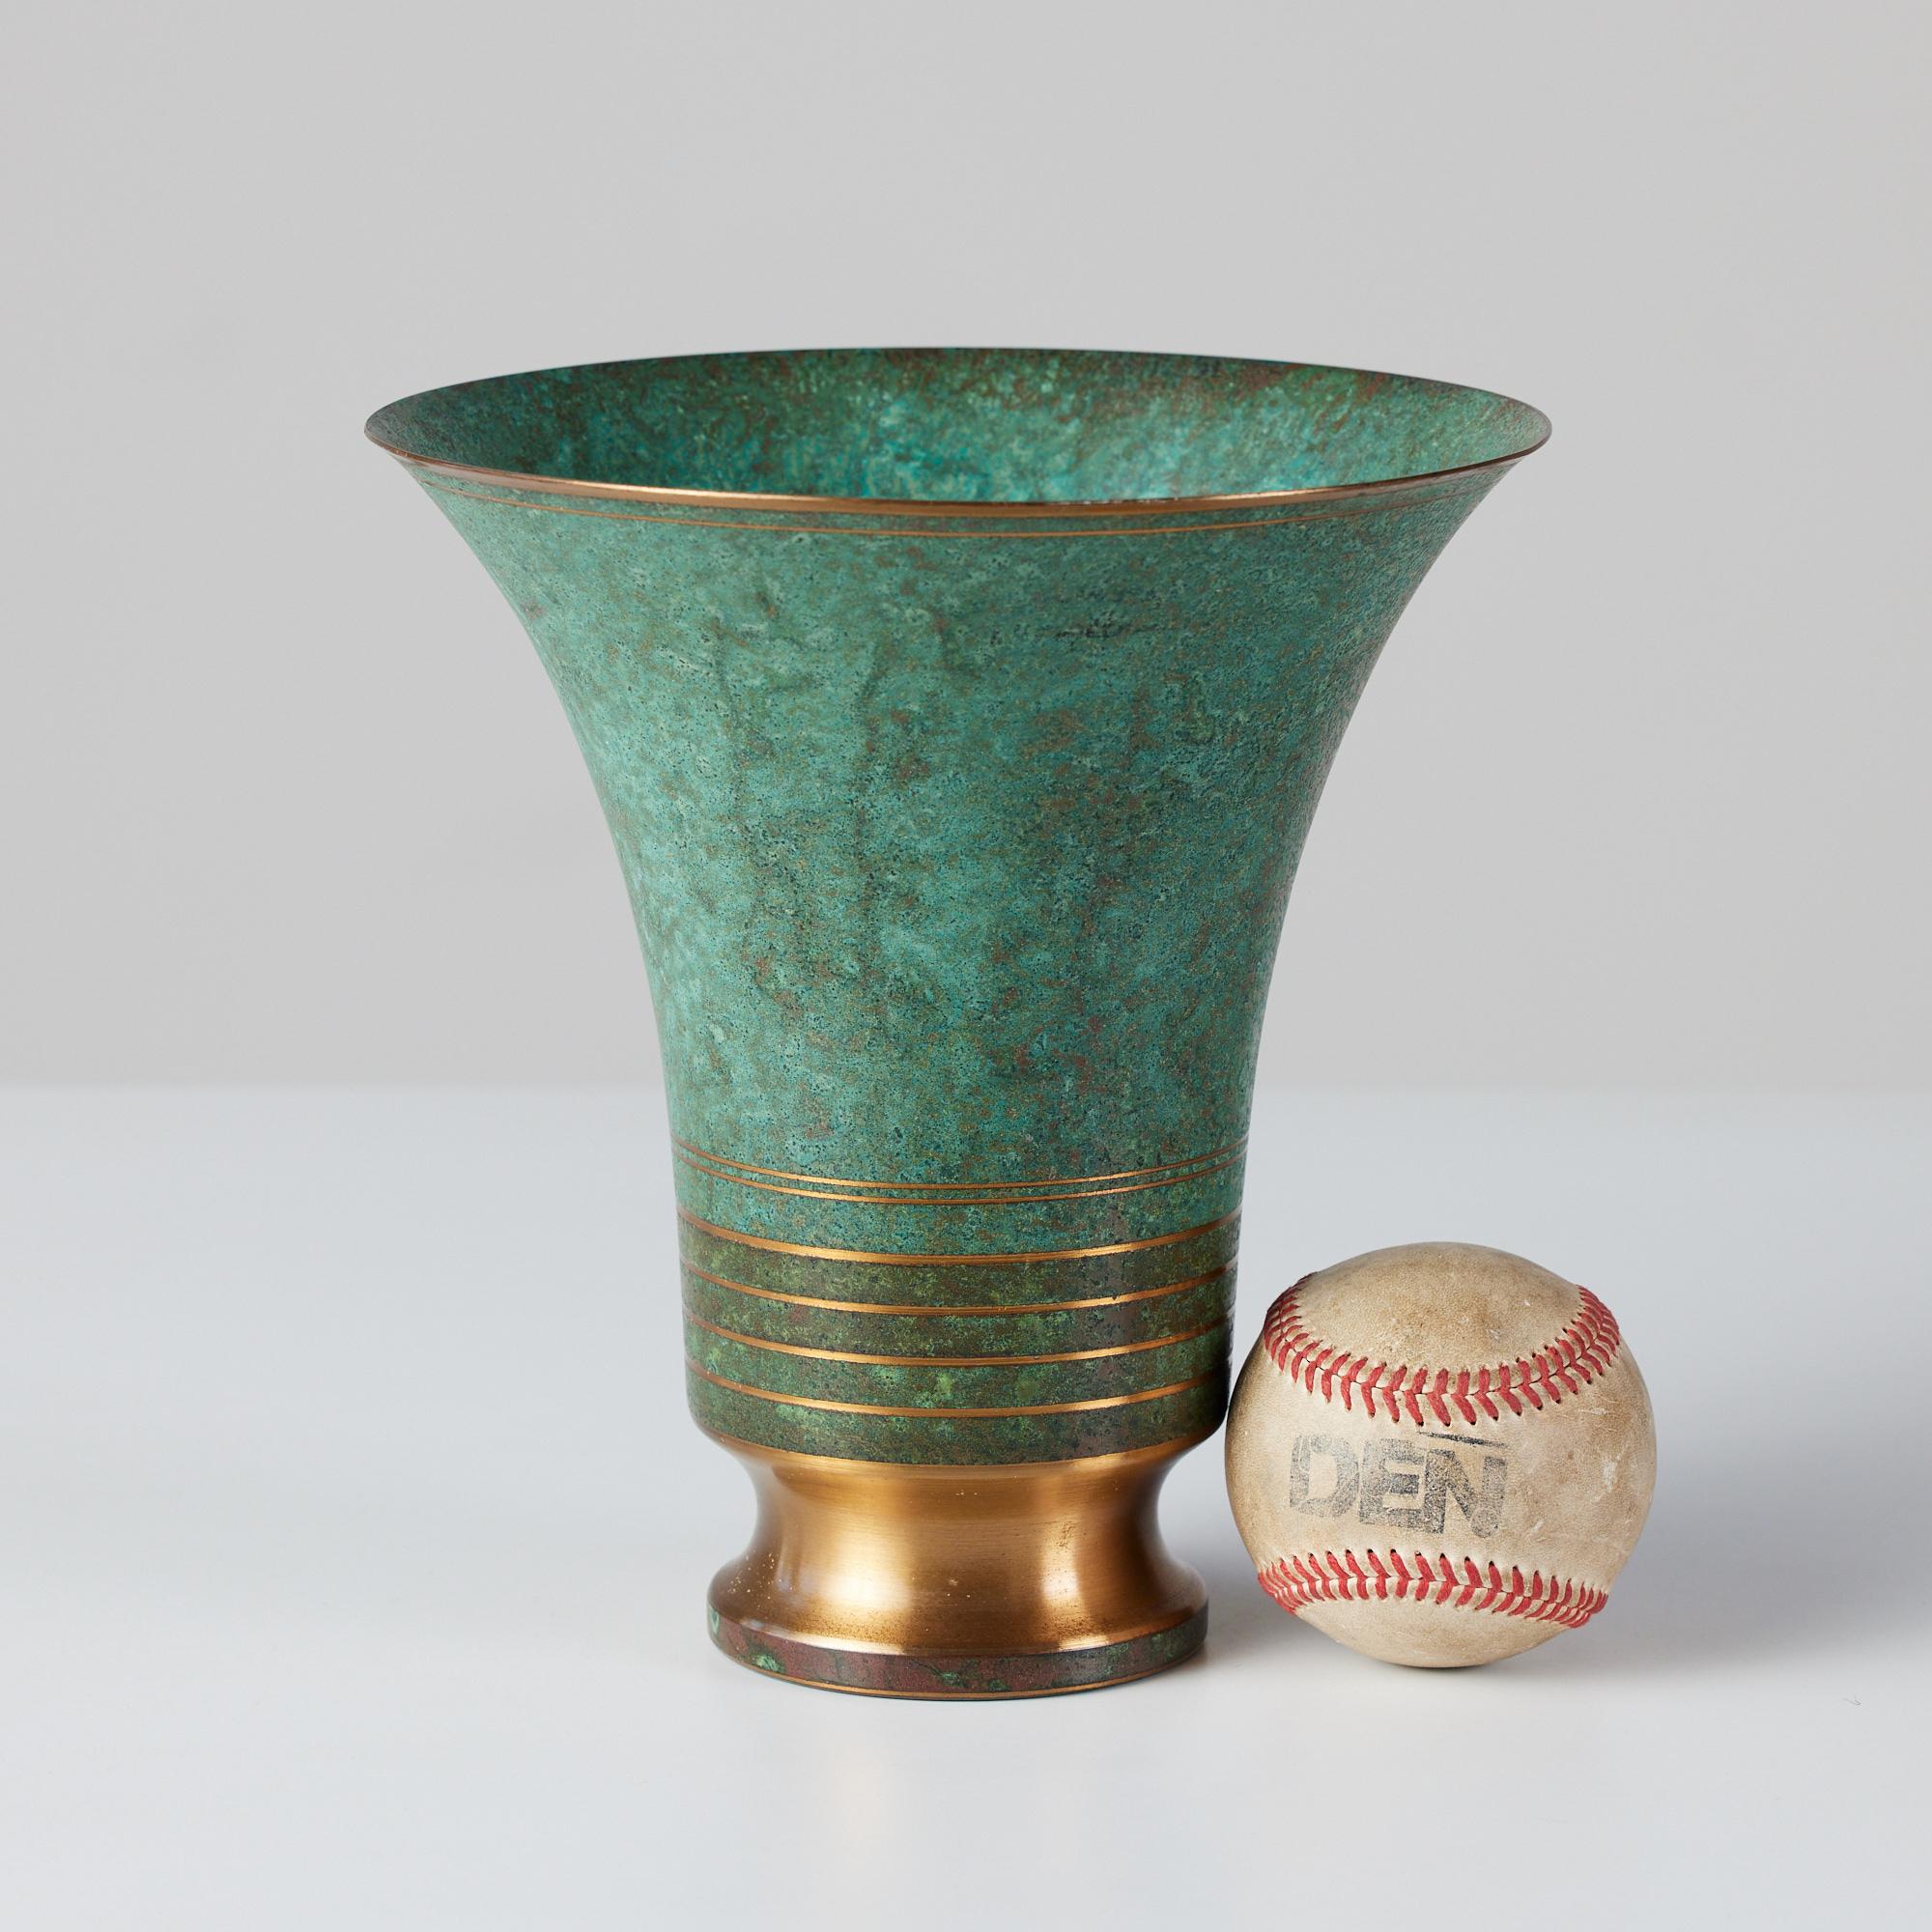 This patinated Art Deco bronze tulip shaped vessel by Carl Sorensen, c.1930s, USA flares out at the top with a con-caved polished foot. The base of the vessel features clean polished bronze lines, creating a lovely contrast between the verdigris and